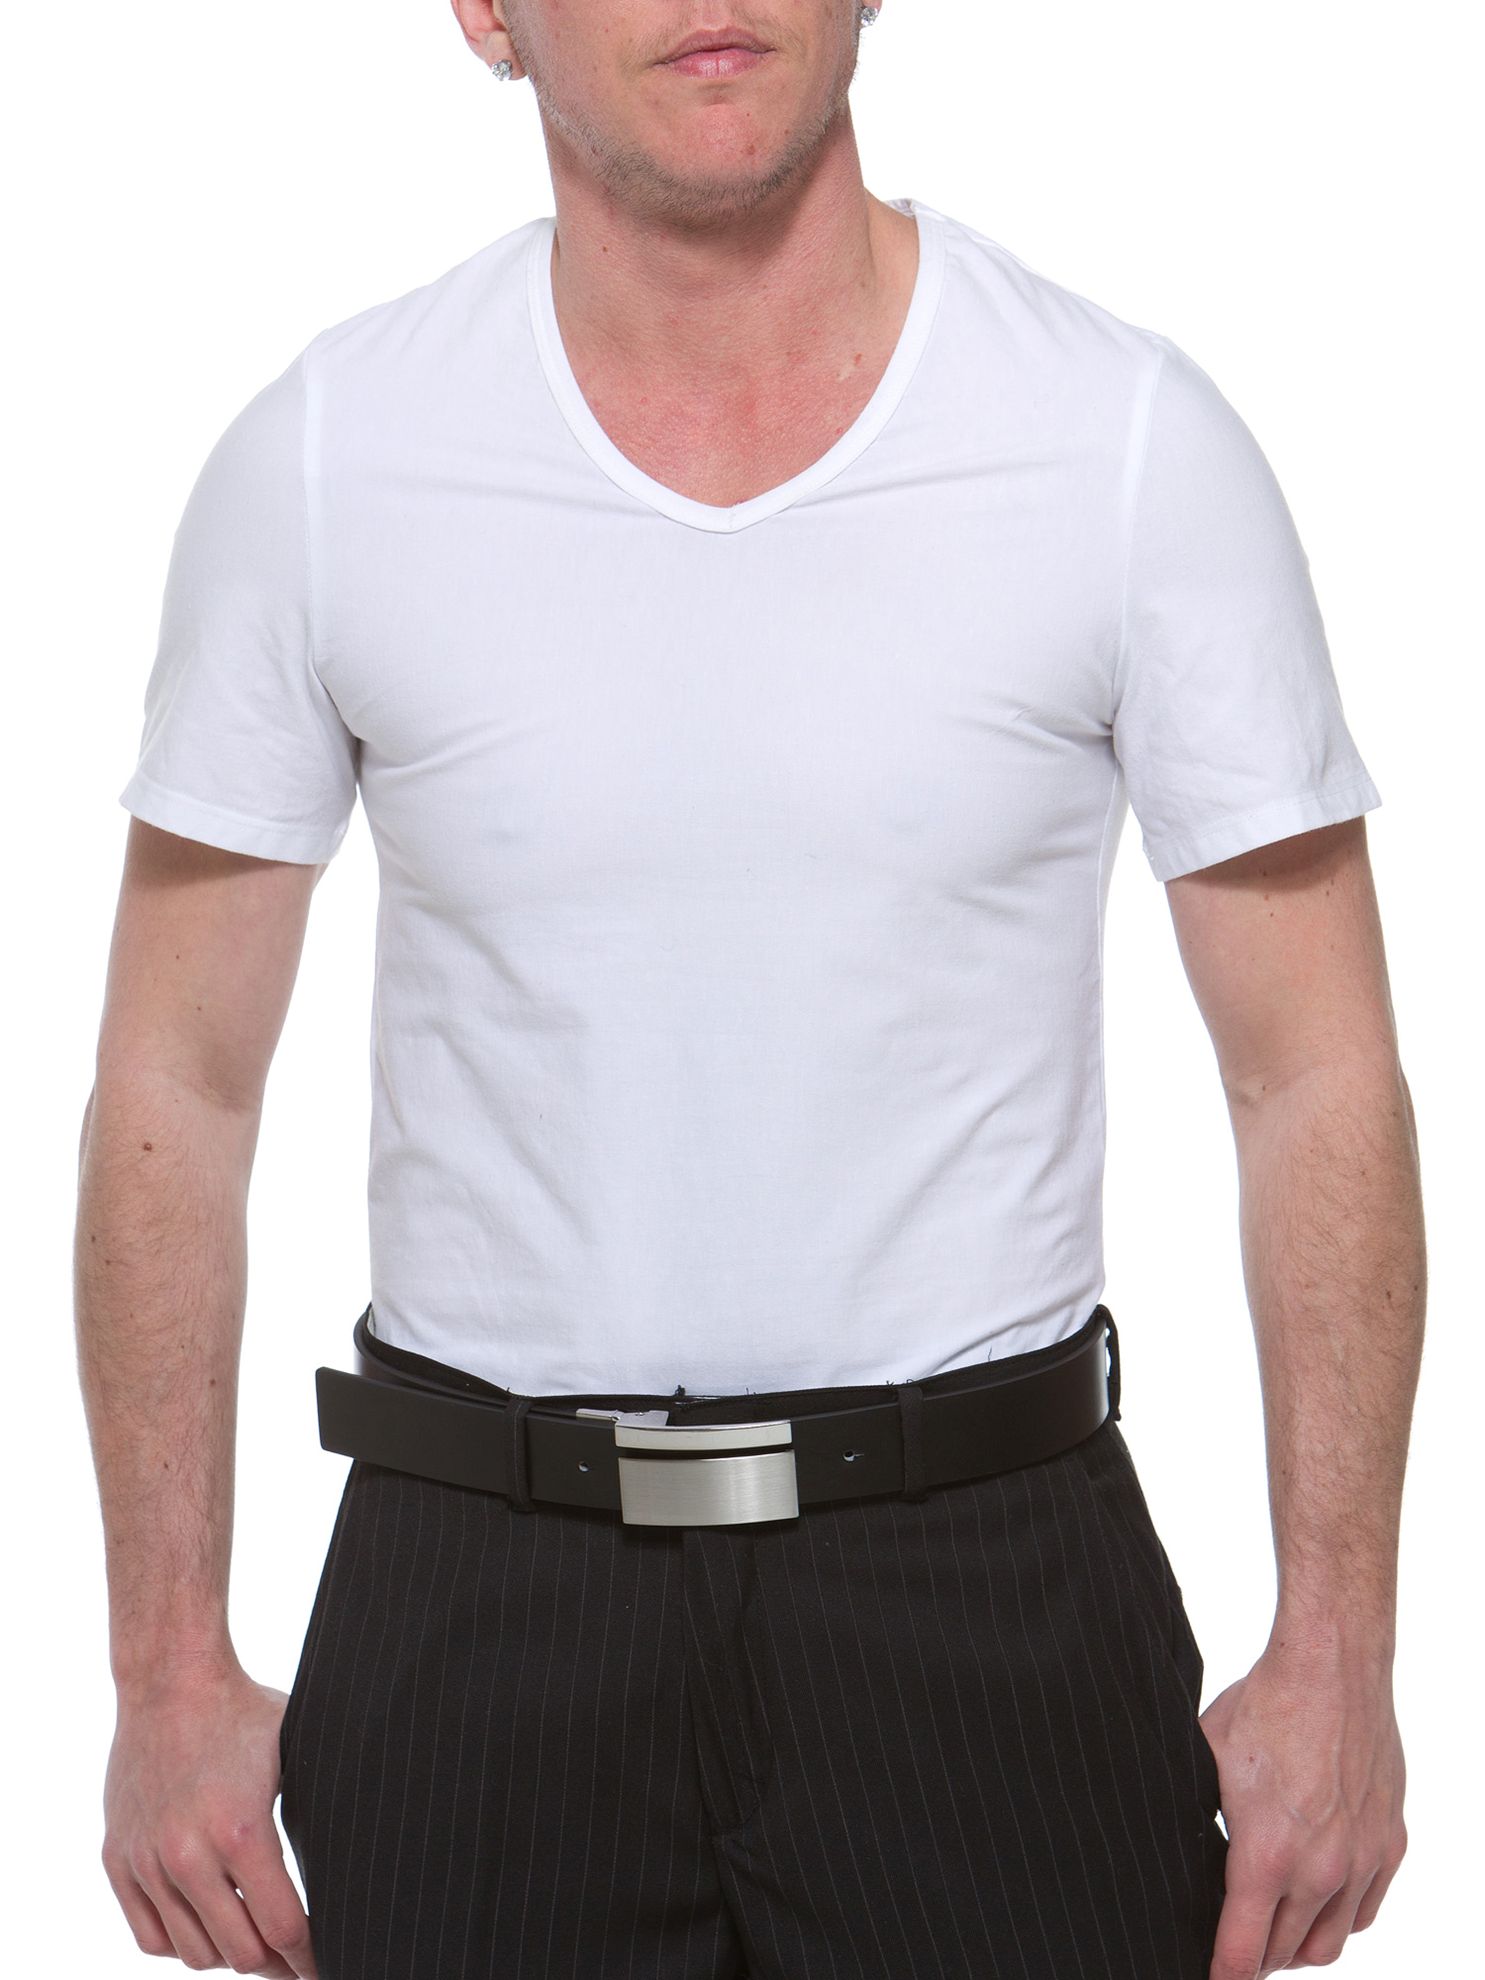 https://www.f2mbinders.com/images/thumbs/0000370_magicotton-v-neck-compression-shirt.jpeg